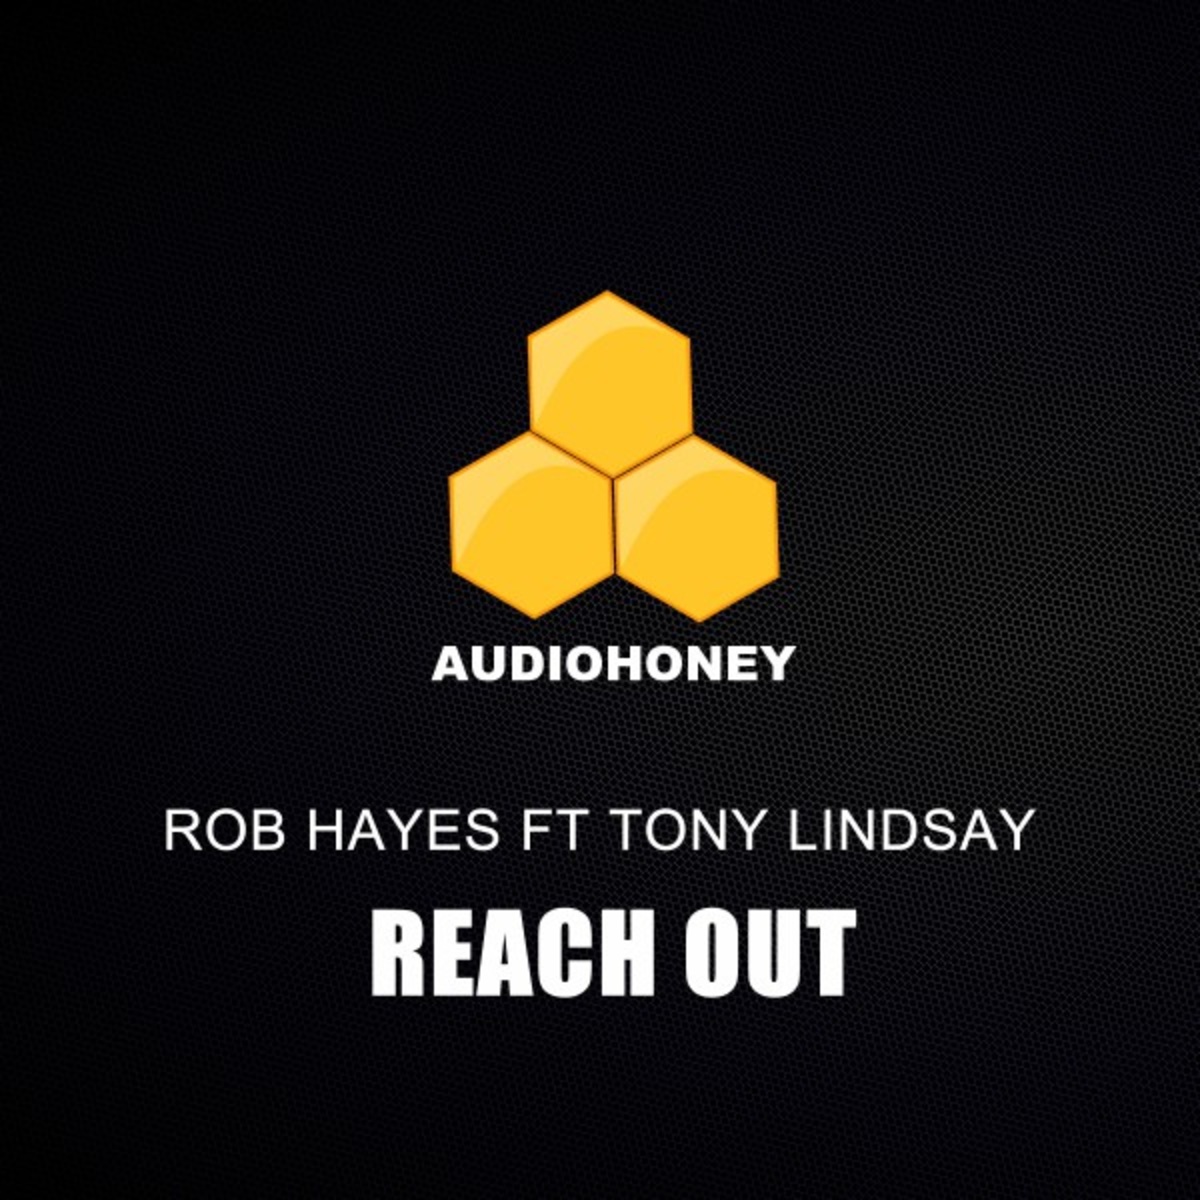 Rob Hayes - Reach Out / Audio Honey